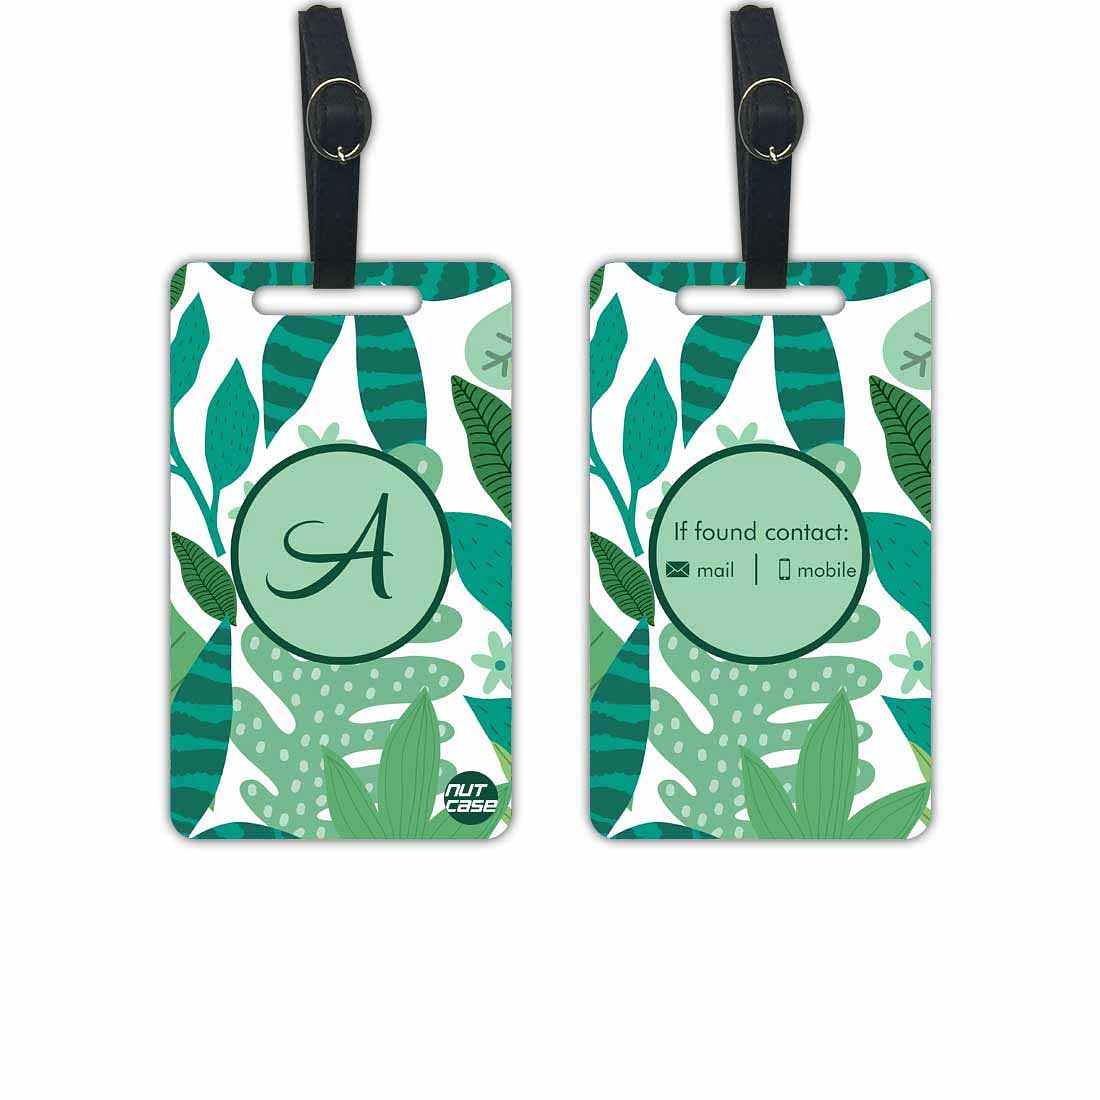 Custom-made Luggage Tags Gift-Set  - Add your Name - Set of 2 Nutcase